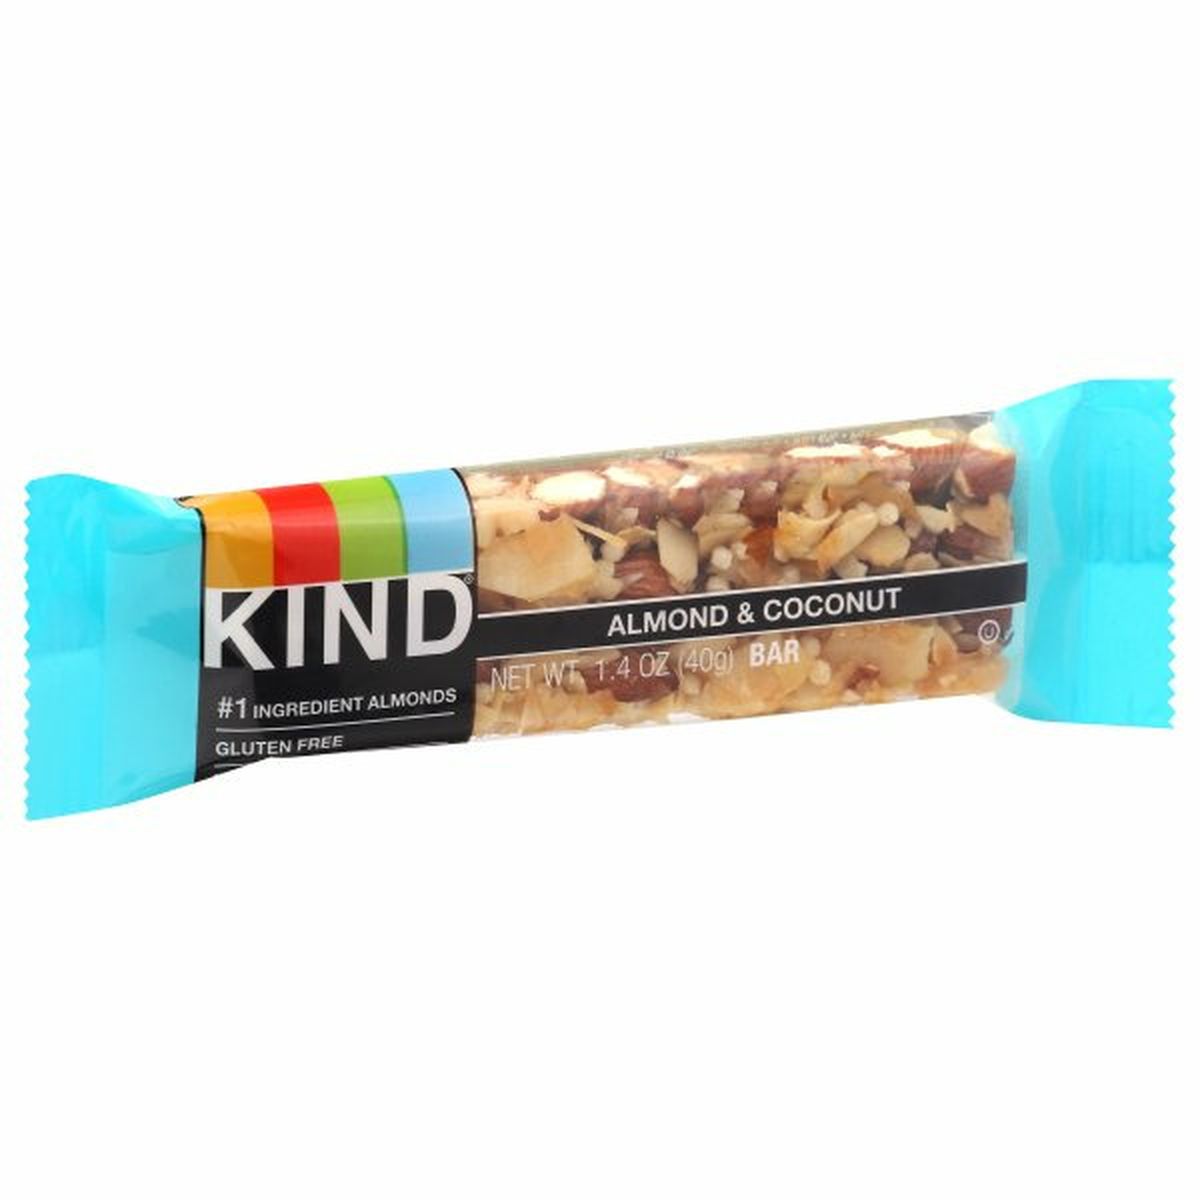 Calories in KIND Bar, Almond & Coconut